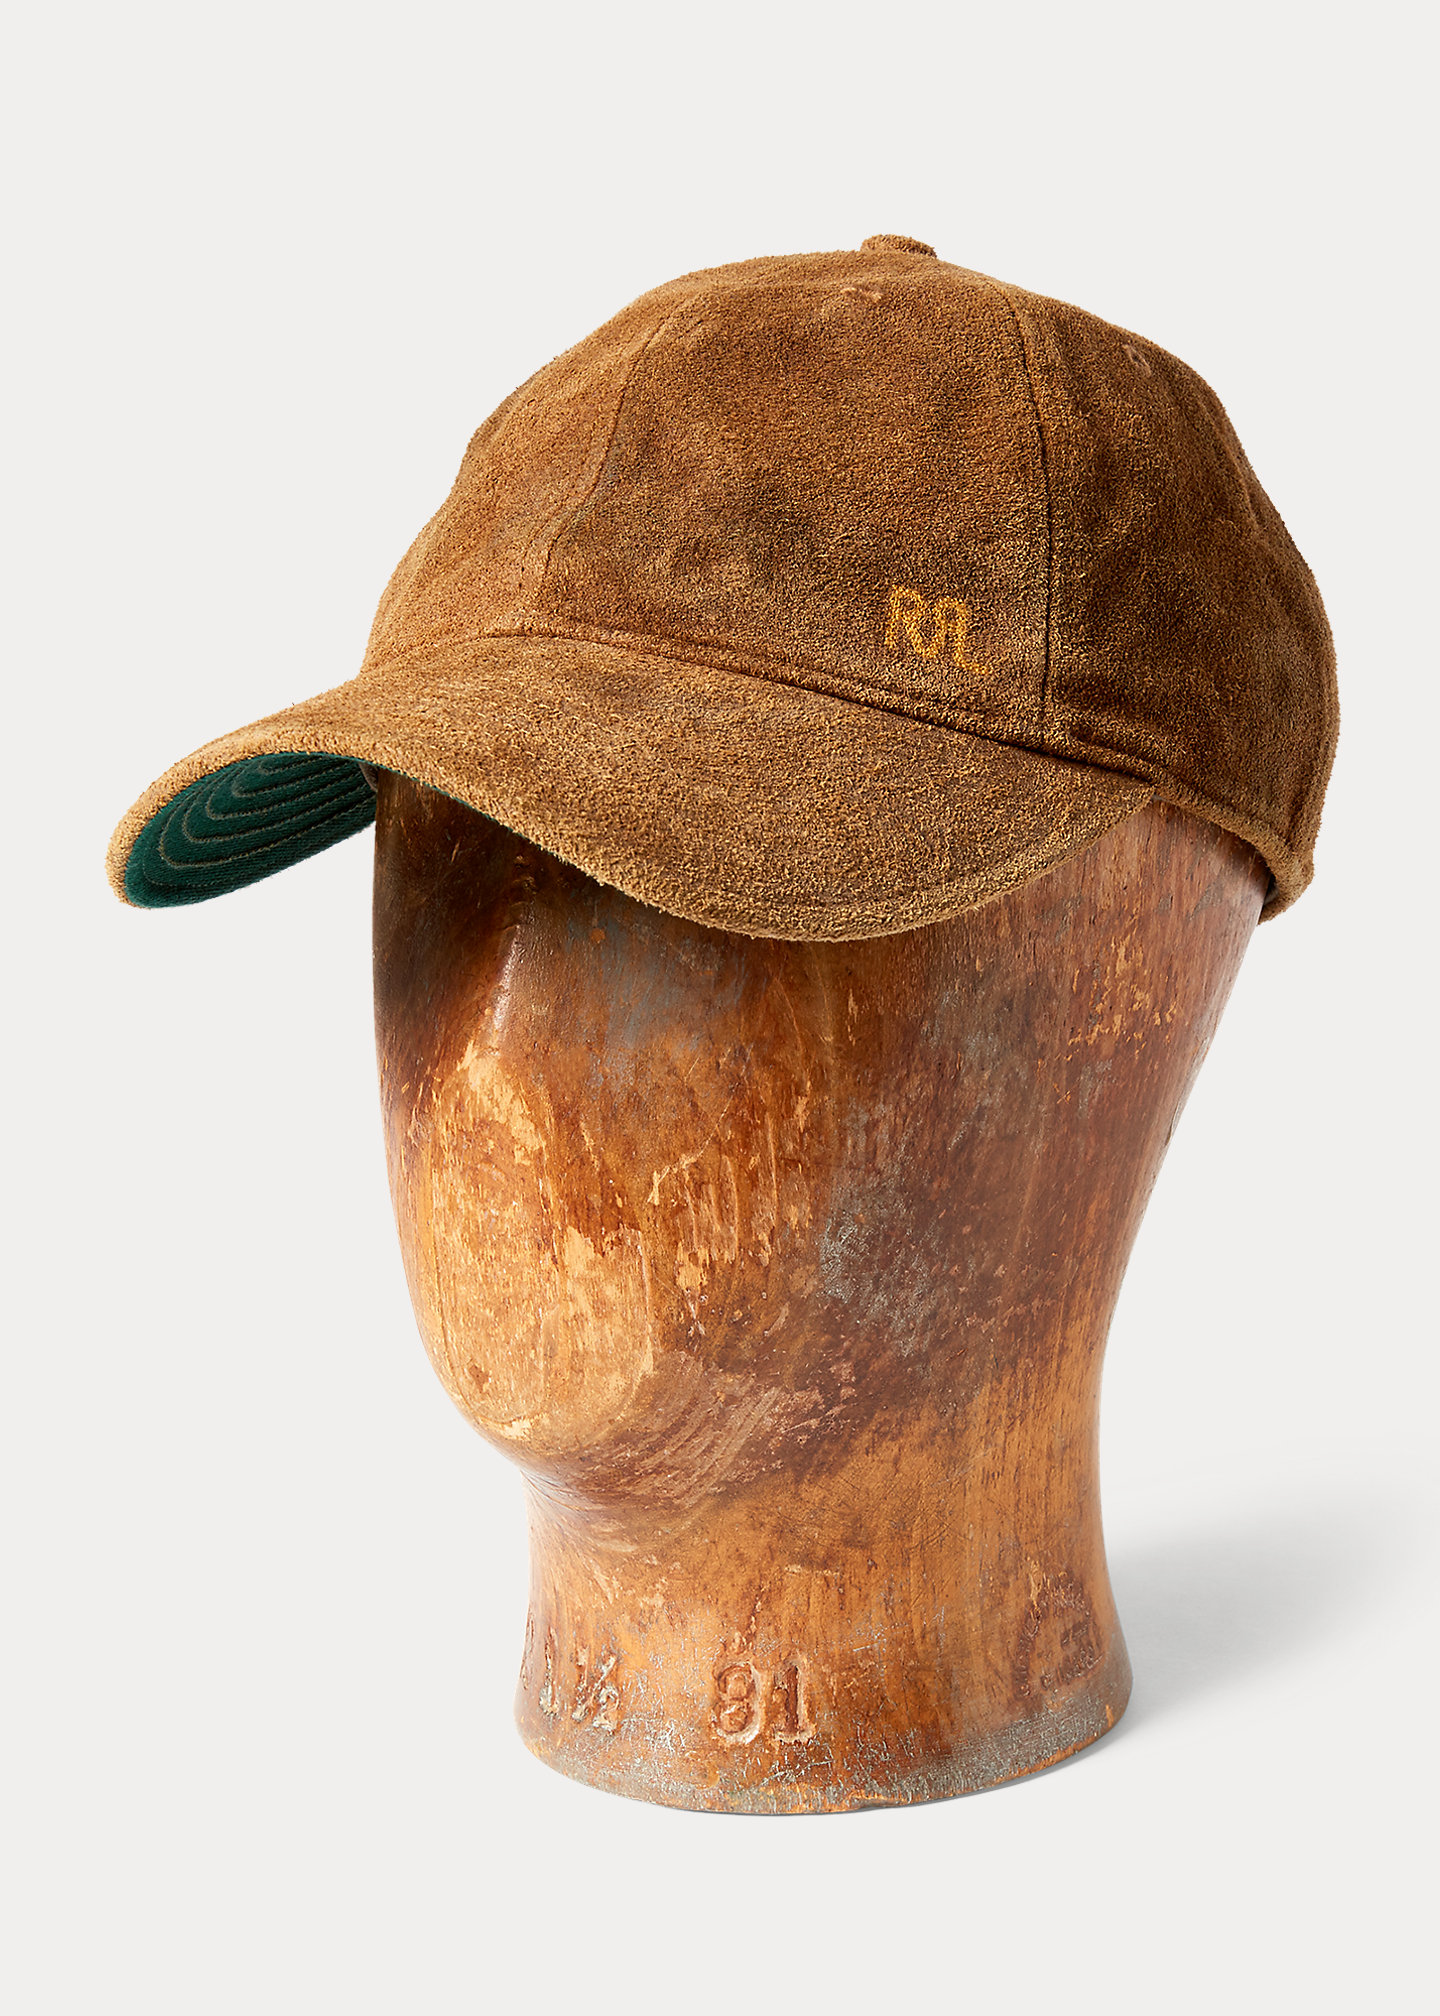 Roughout Suede Ball Cap